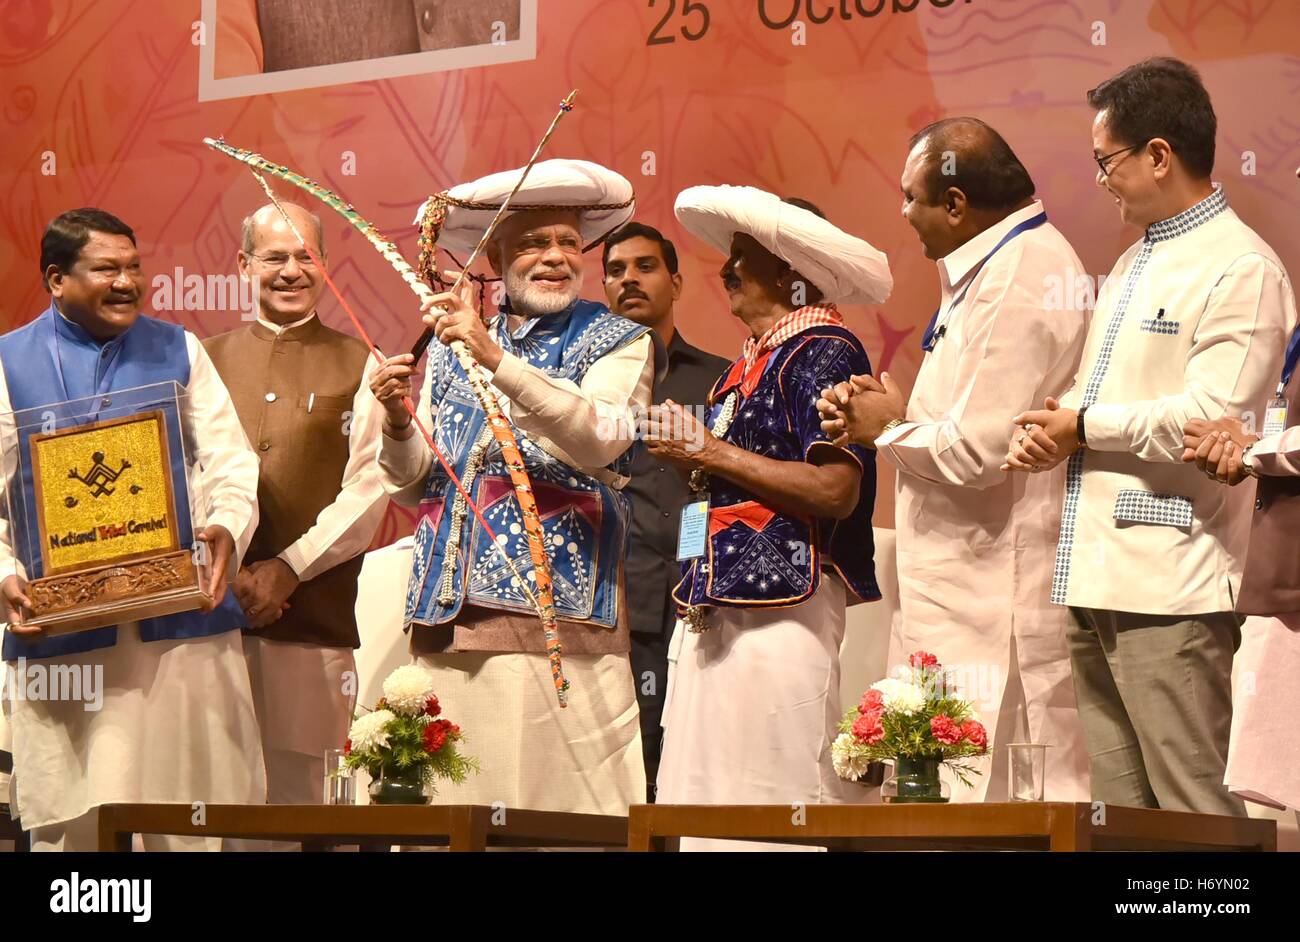 Indian Prime Minister Narendra Modi wearing a tribal hat inaugurates the National Tribal Carnival October 25, 2016 in New Delhi, India. Standing with the Prime Minister is Union Minister for Tribal Affairs, Jual Oram, the Minister of State for Environment, Forest and Climate Change Anil Madhav Dave and the Minister of State for Home Affairs, Kiren Rijiju. Stock Photo